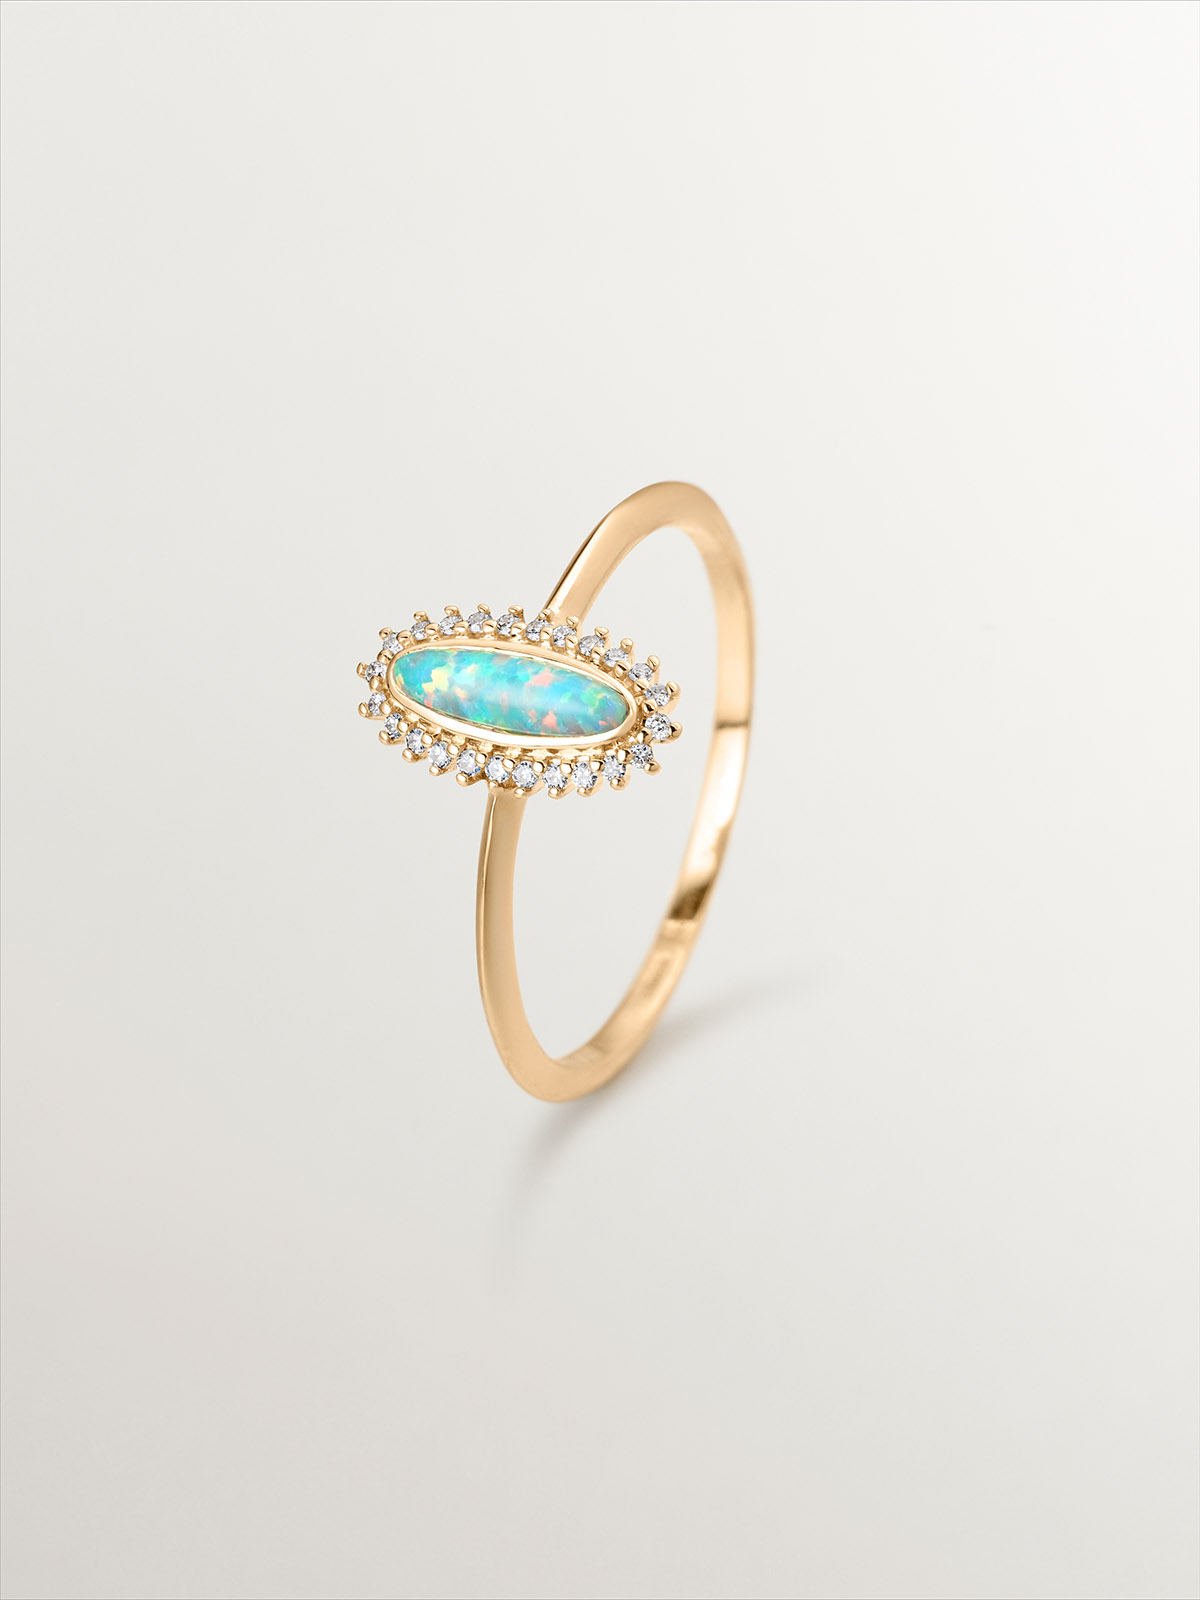 18K Yellow Gold Ring with Turquoise Opal and White Diamonds